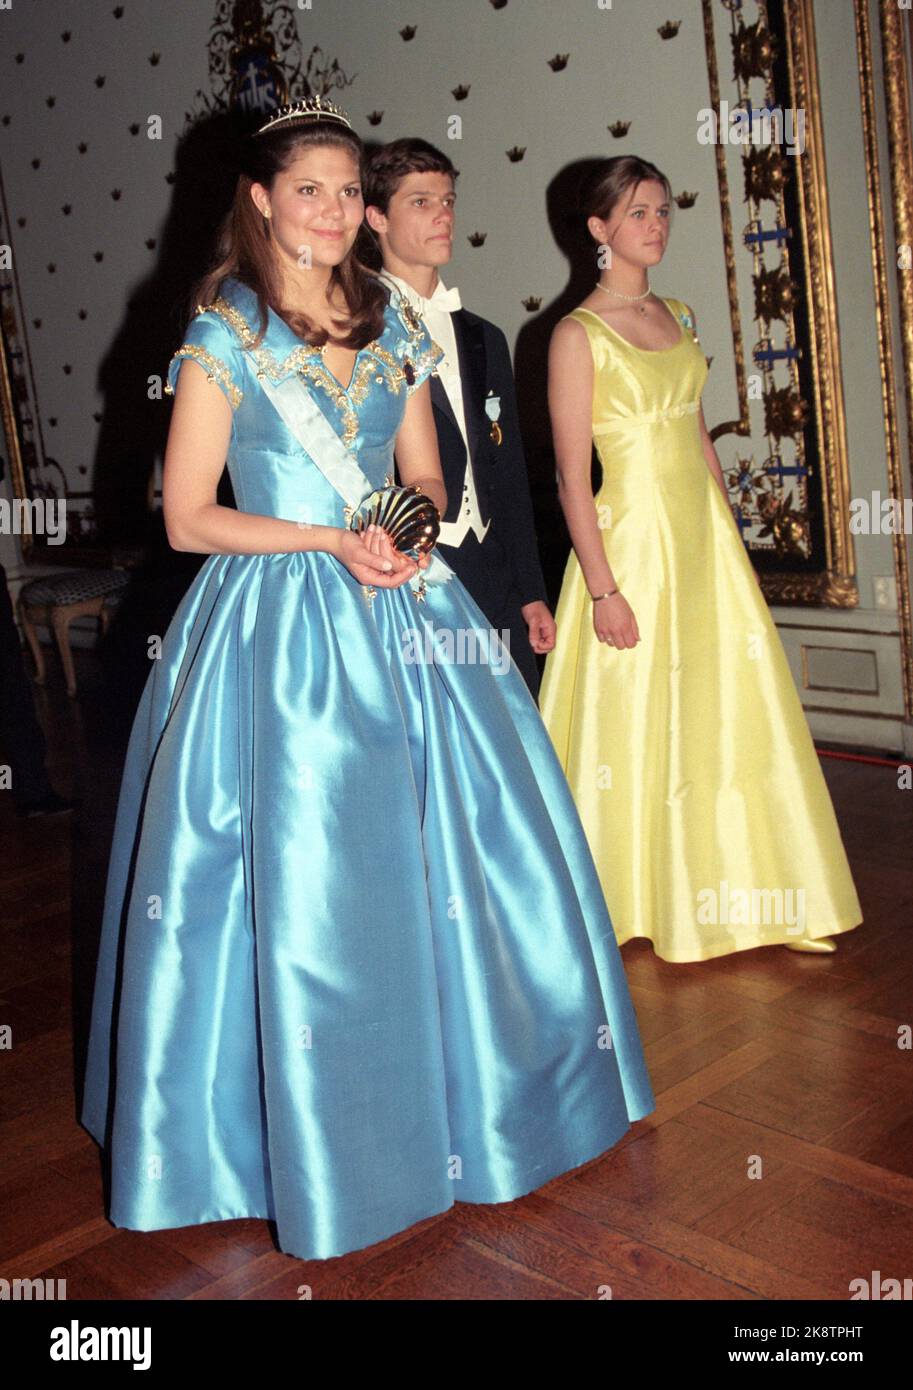 Stockholm 19960501: Sweden's king, King Carl XVI Gustaf 50 years. Gallafest at the Castle. Royal guests arrive. Picture: Gallafest. Crown Princess Victoria, Prince Carl Philip and Princess Madeleine. Photo: Bjørn Sigurdsøn / NTB / NTB Stock Photo